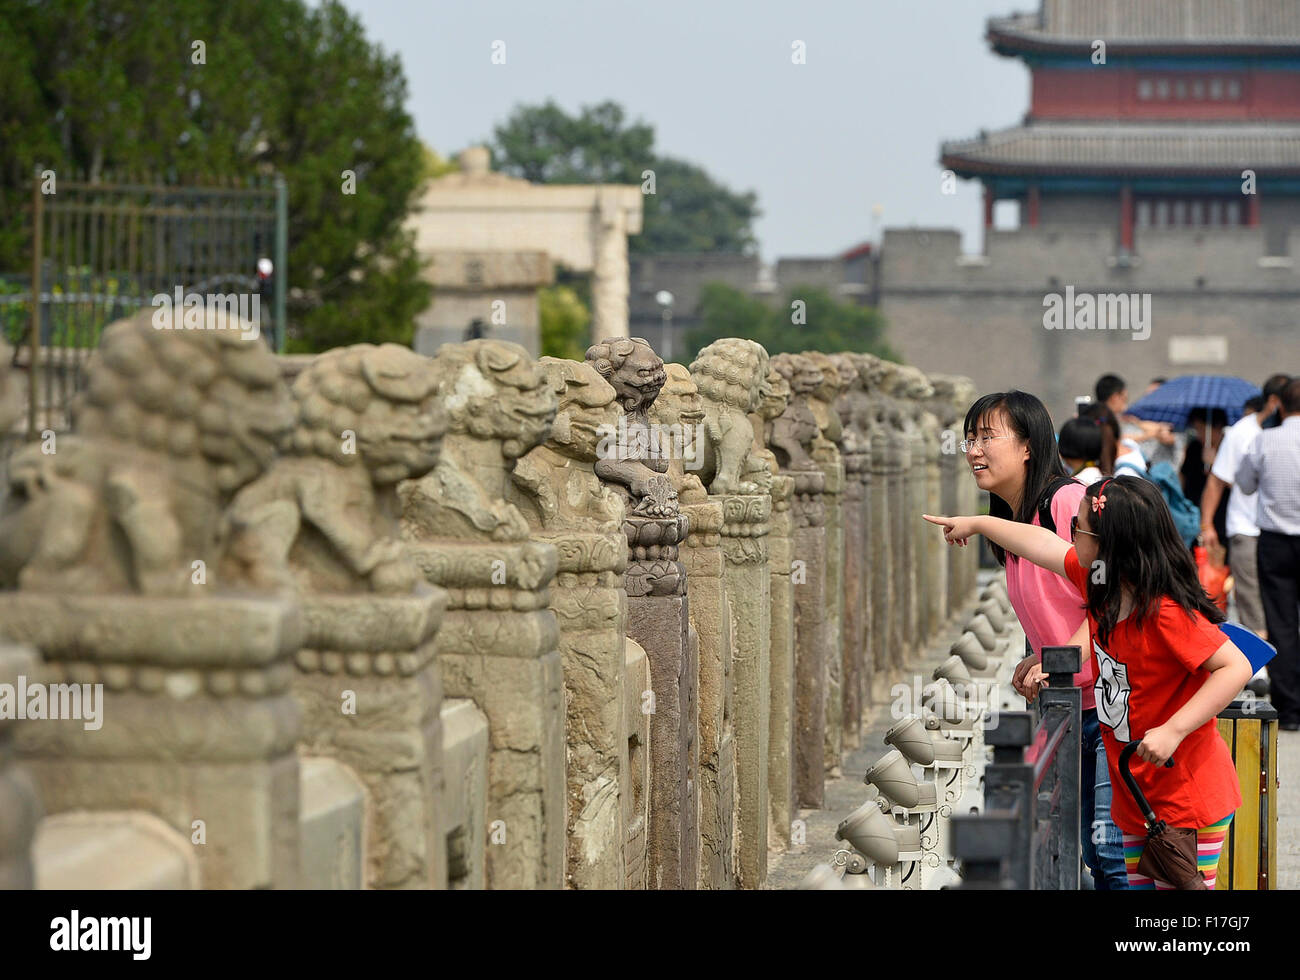 Beijing, Capital of China. 29th Aug, 2015. People visit Lugou Bridge where Japan launched the all-out war of aggression against China, in Beijing, Capital of China, Aug. 29, 2015. China will stage a military parade on Sept. 3 to commemorate the 70th anniversary of the victory of the Chinese People's War of Resistance Against Japanese Aggression and the World Anti-Fascist War. © Peng Zhaozhi/Xinhua/Alamy Live News Stock Photo